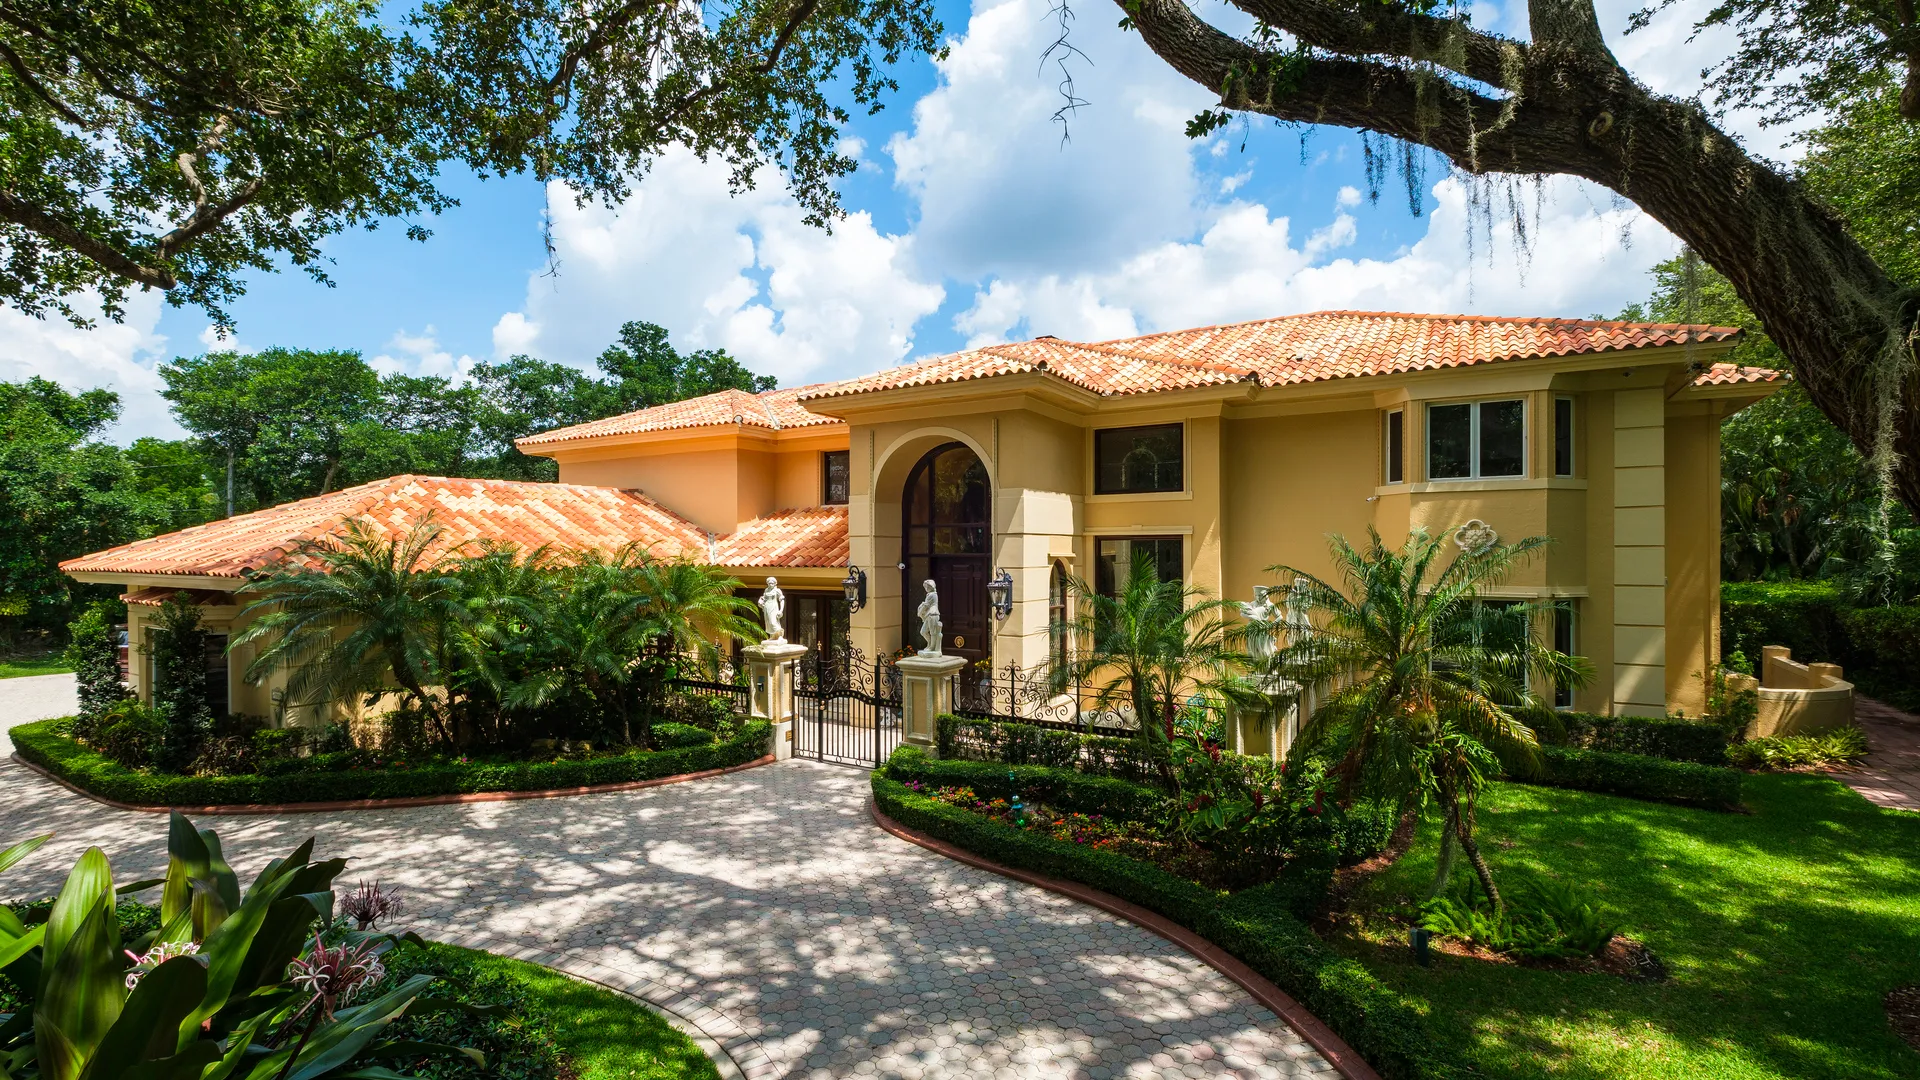 Modern Mediterranean architecture style home in the historic City of Coral Gables located in Miami.